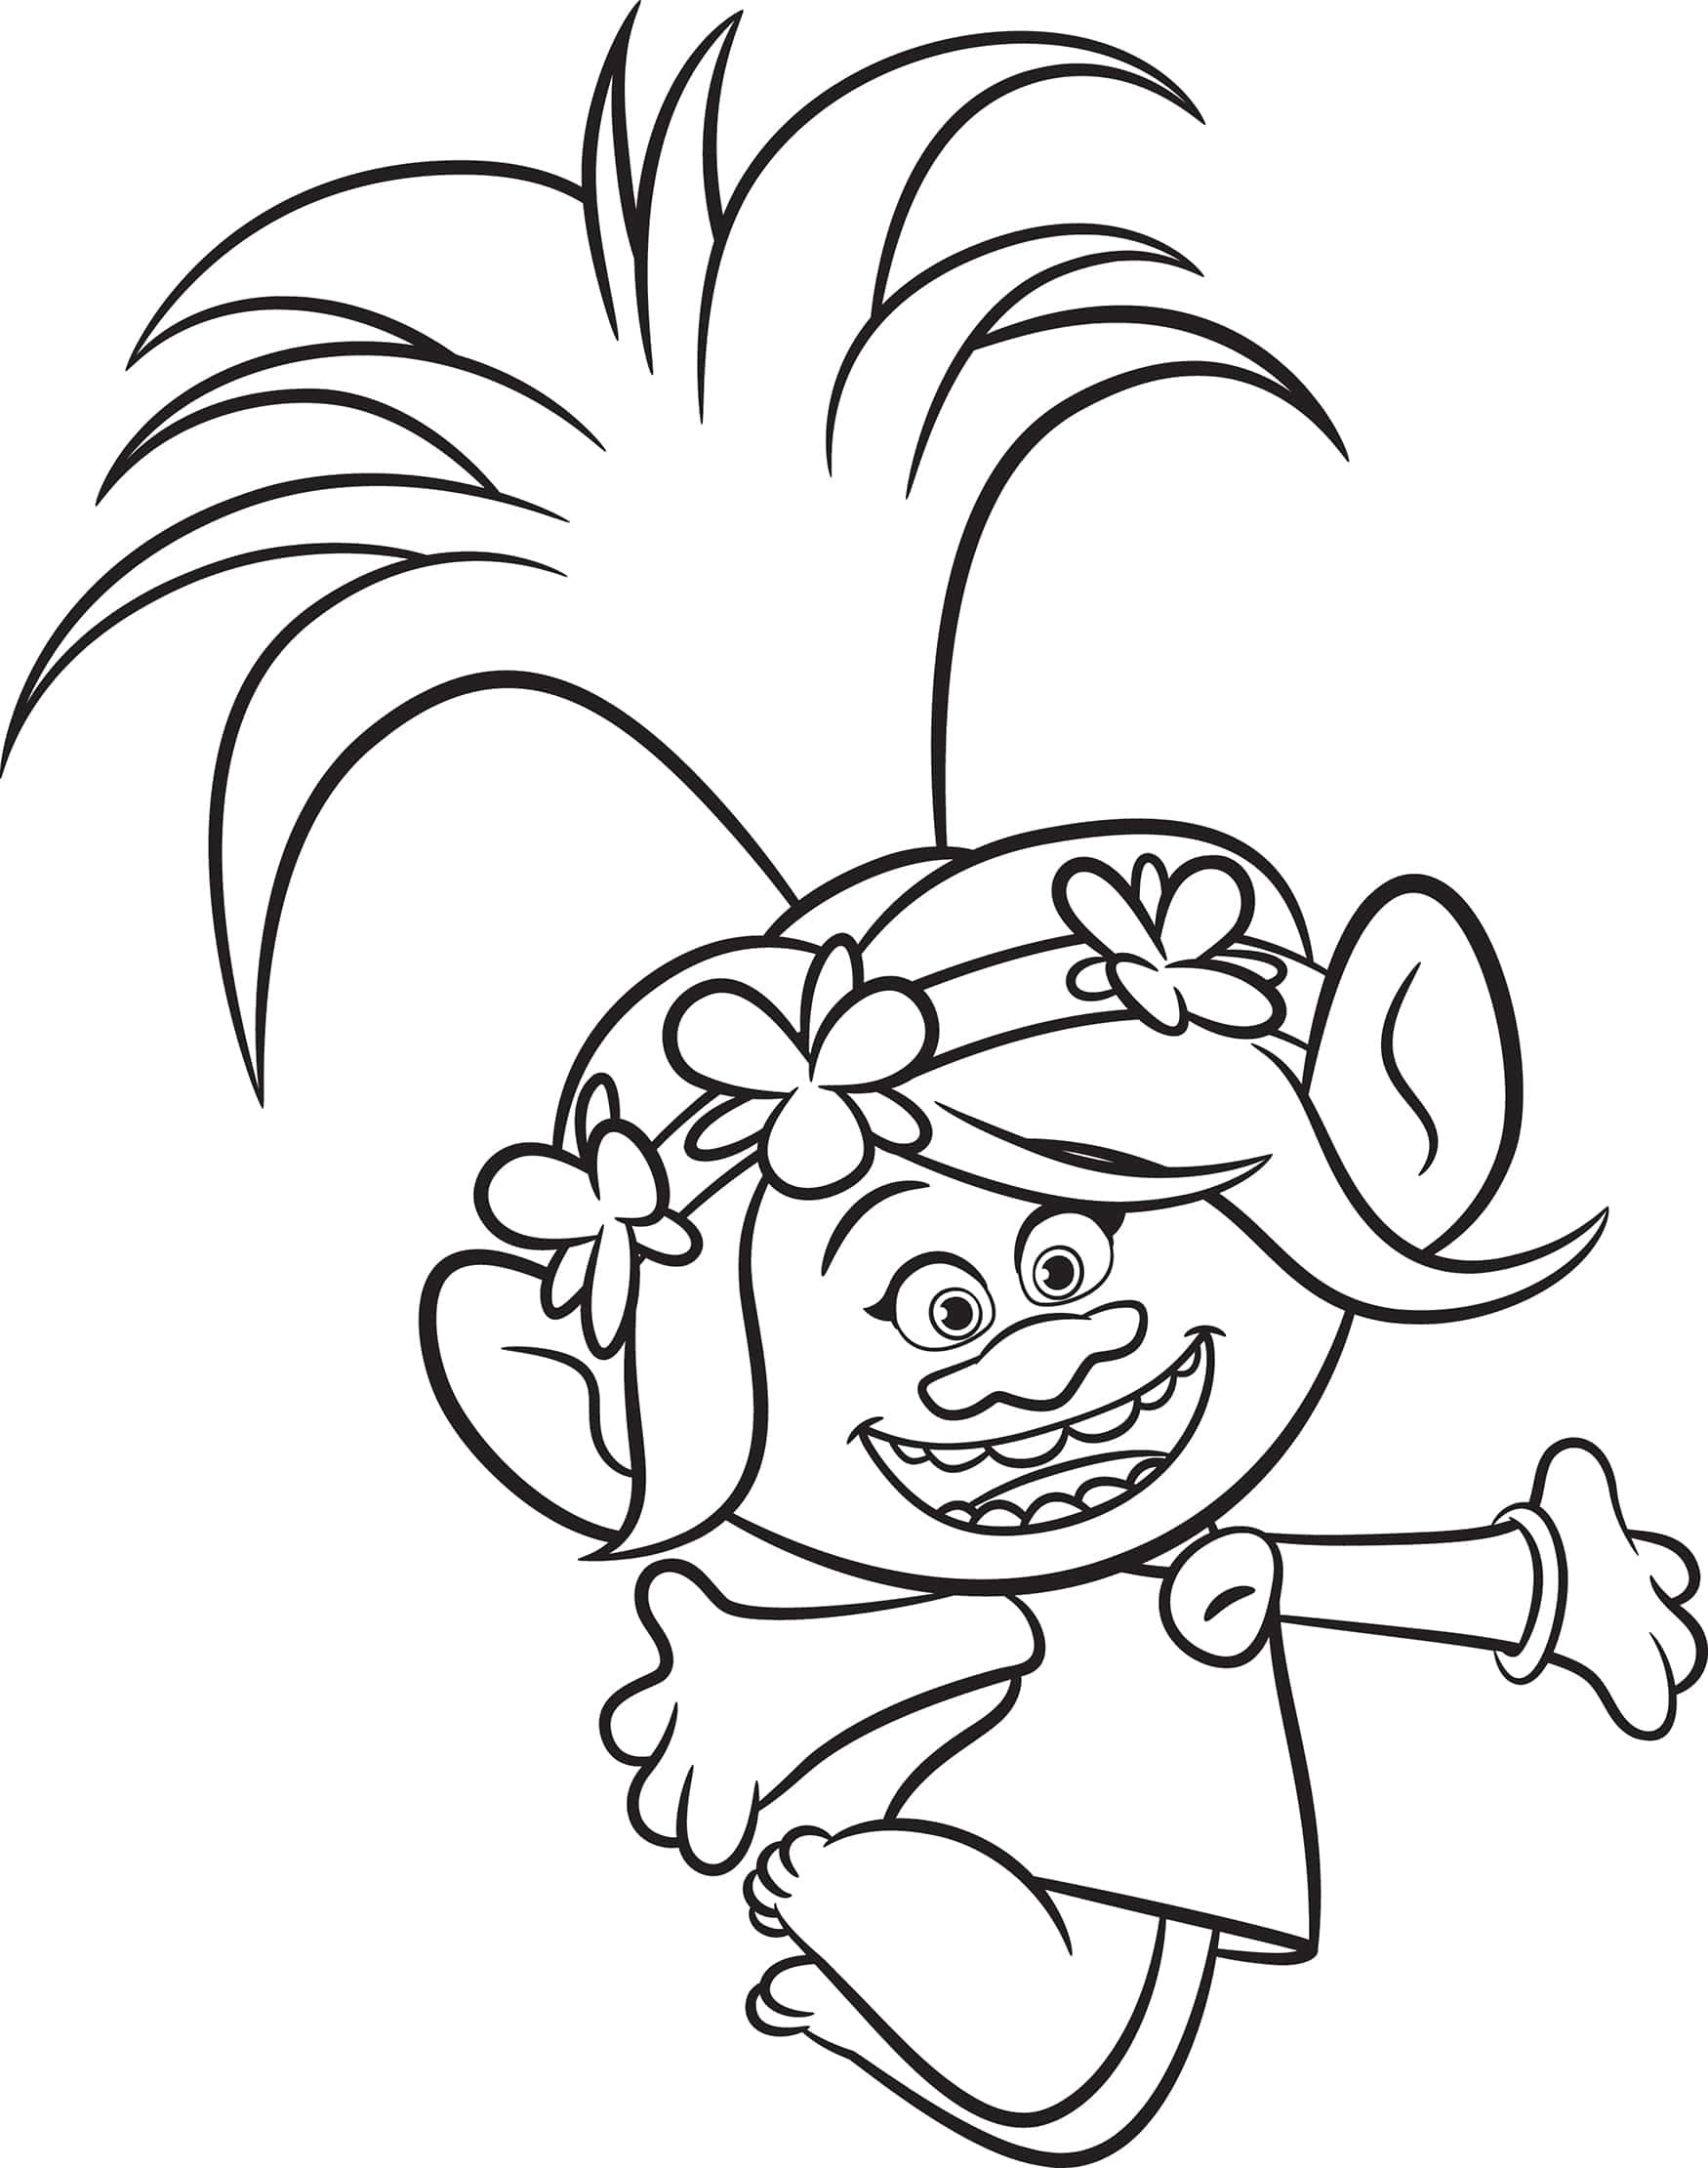 Trolls Printable Coloring Pages
 DreamWorks Trolls Party Edition – Princess Poppy Inspired